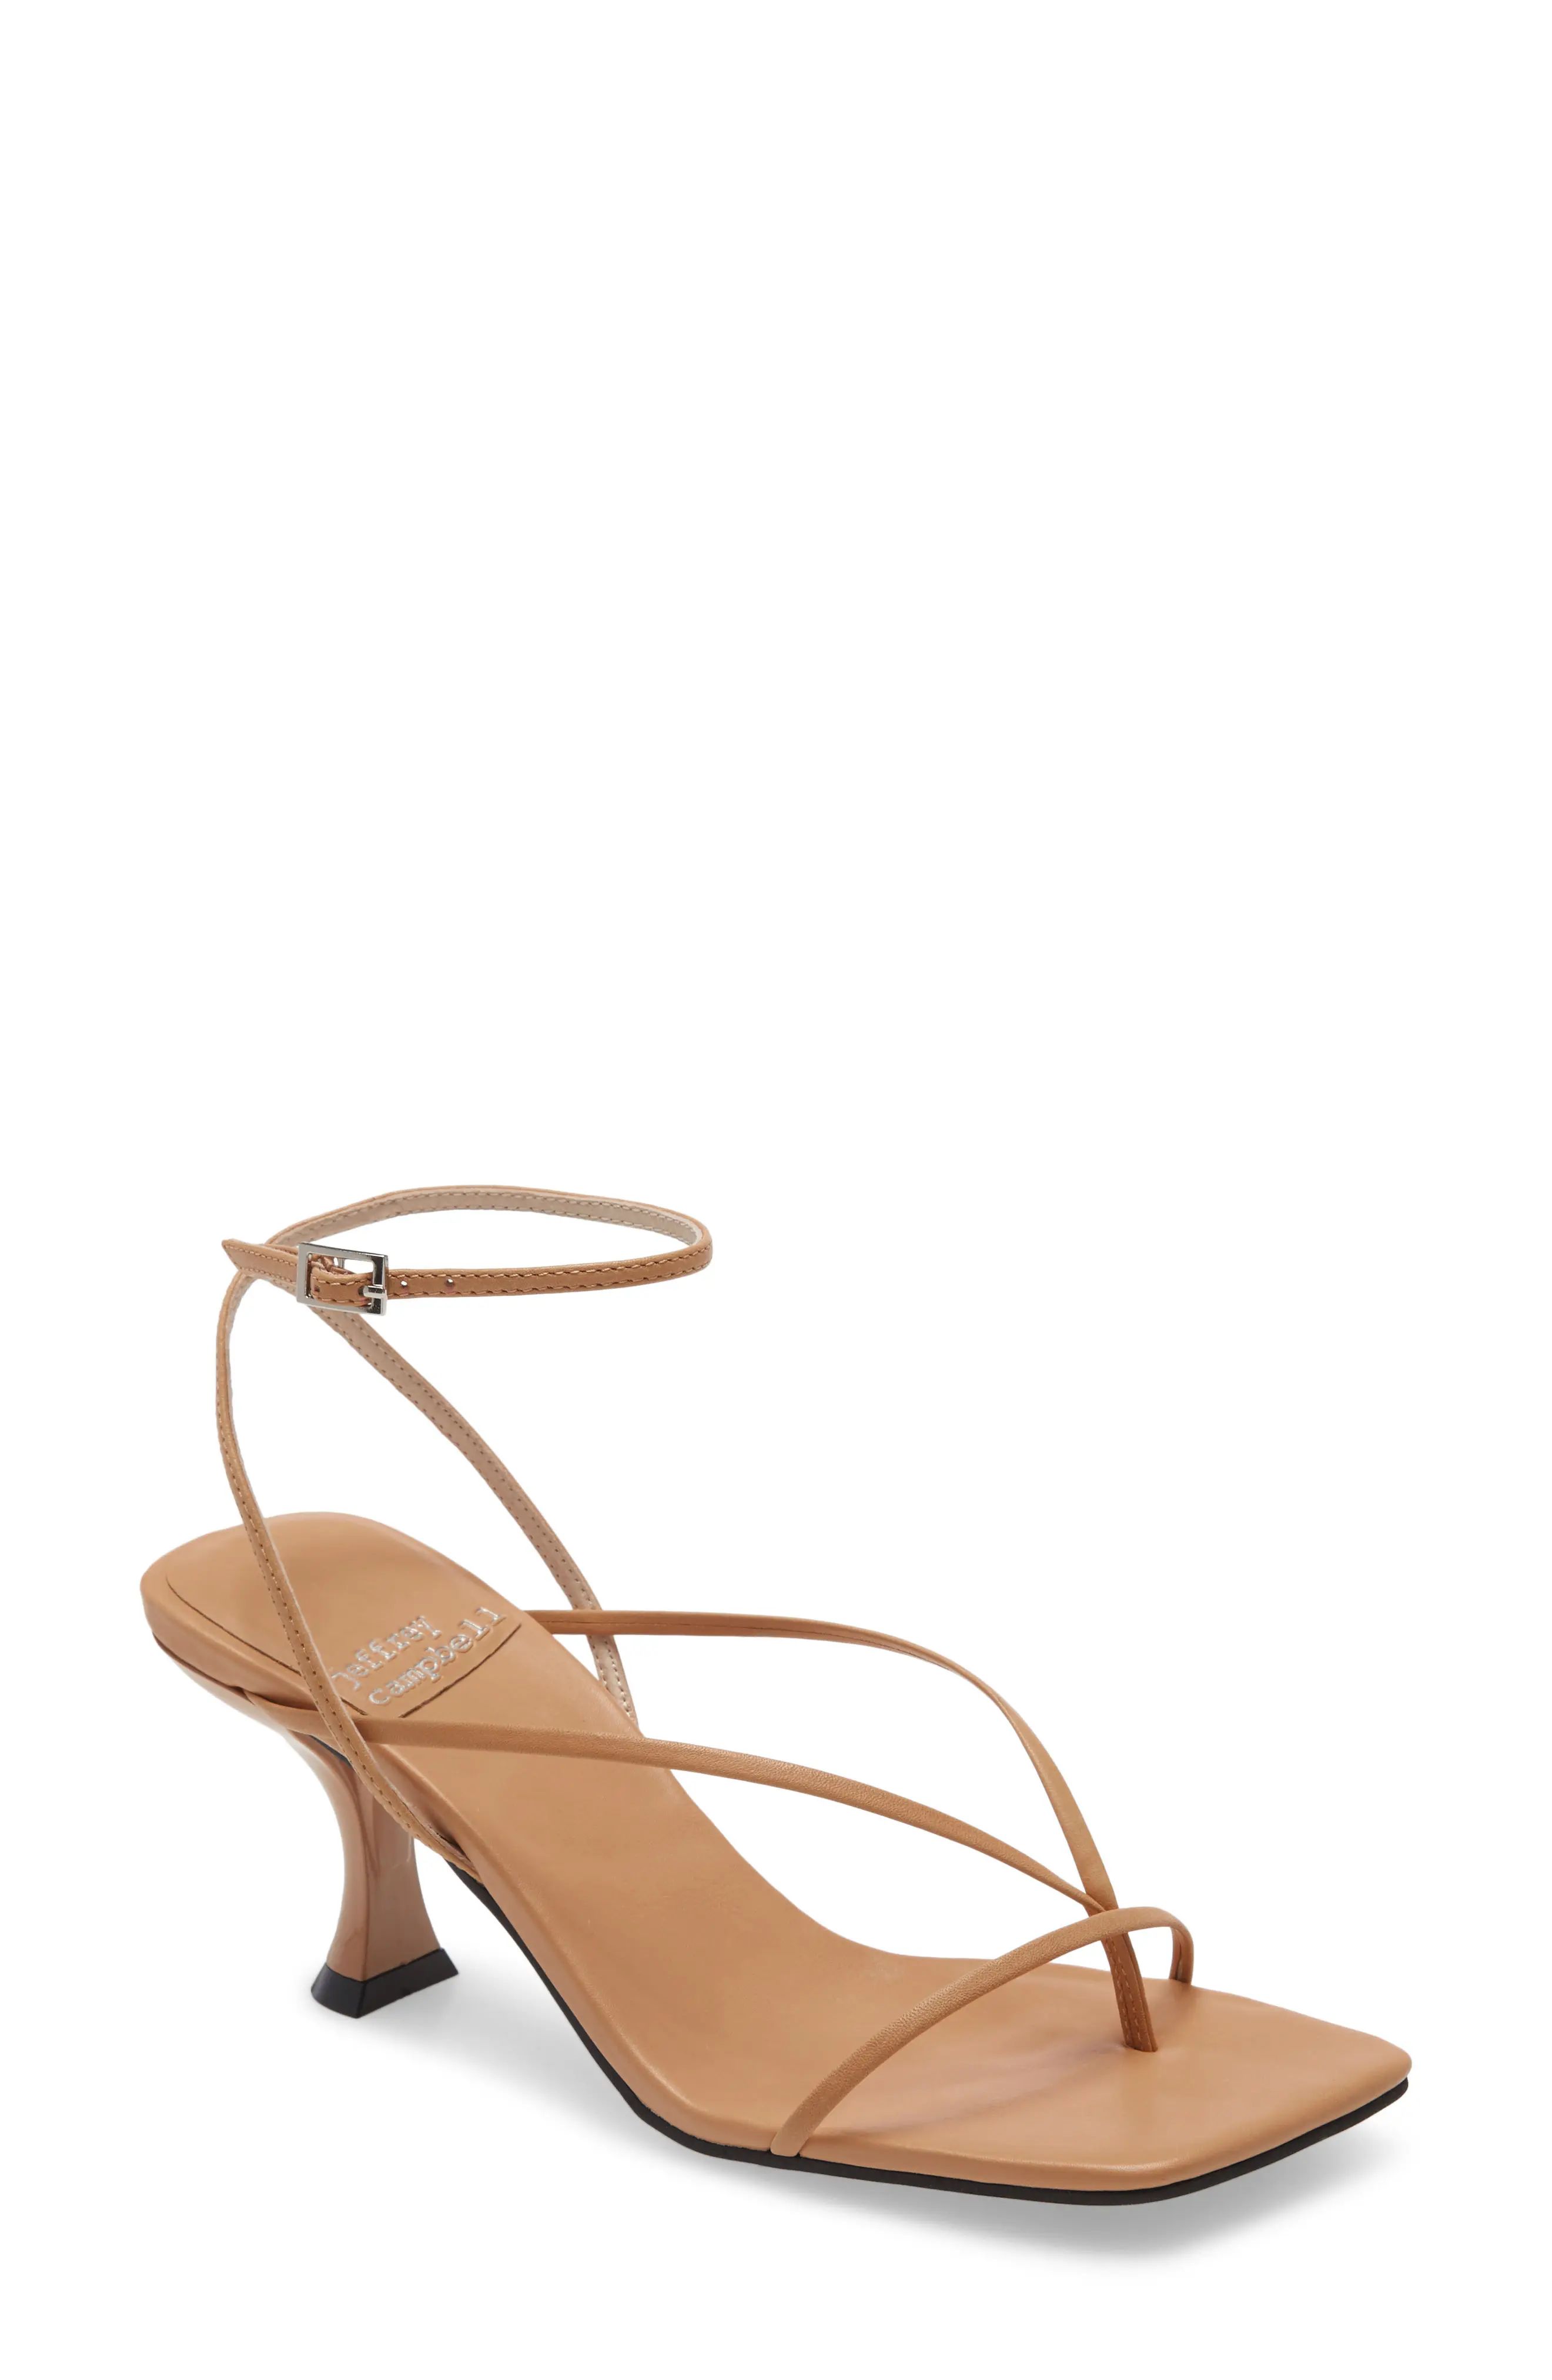 Nordstrom Online & In Store: Shoes, Jewelry, Clothing, Makeup, Dresses | Nordstrom